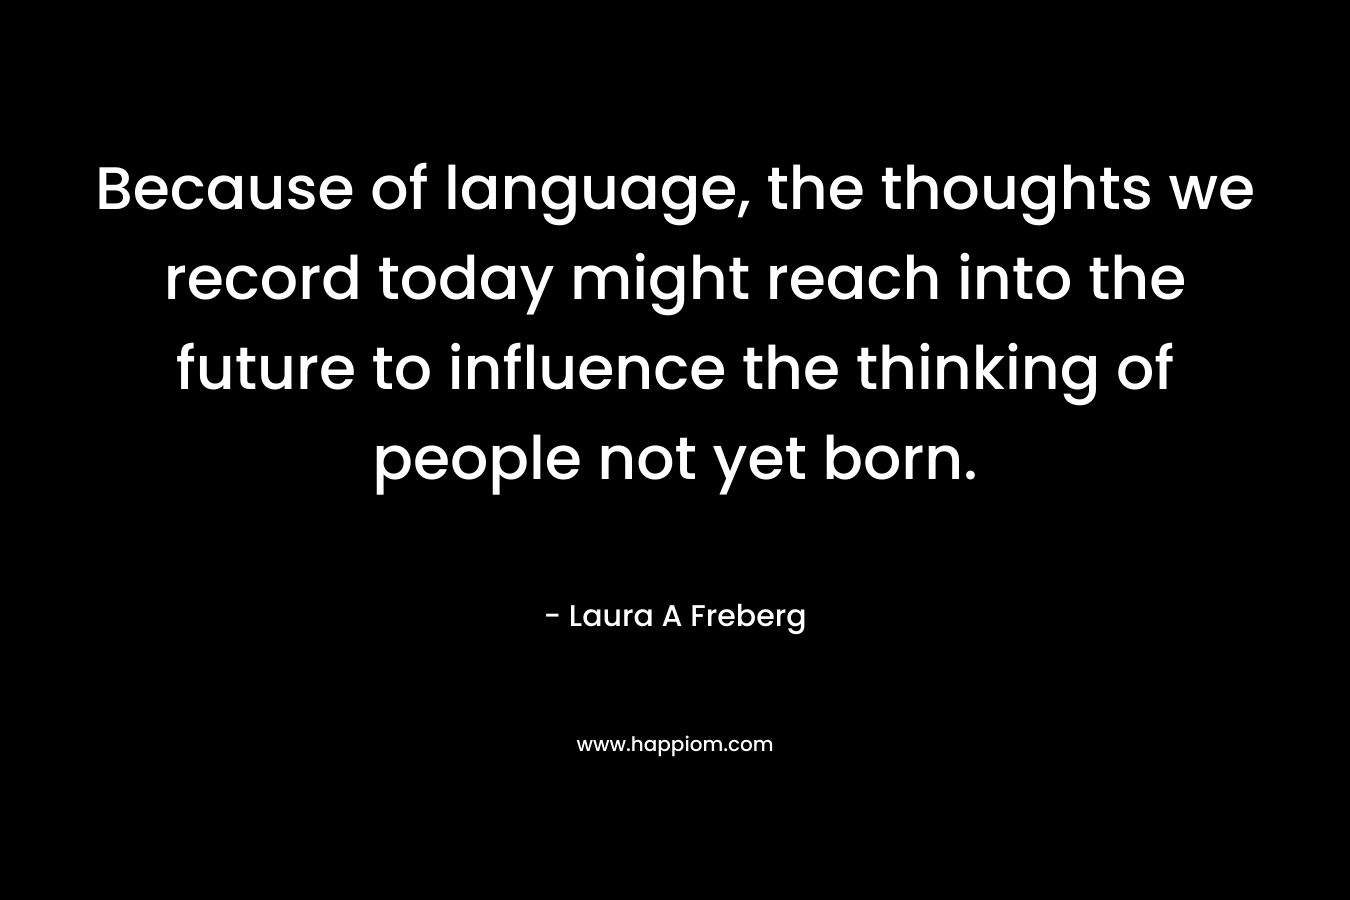 Because of language, the thoughts we record today might reach into the future to influence the thinking of people not yet born.